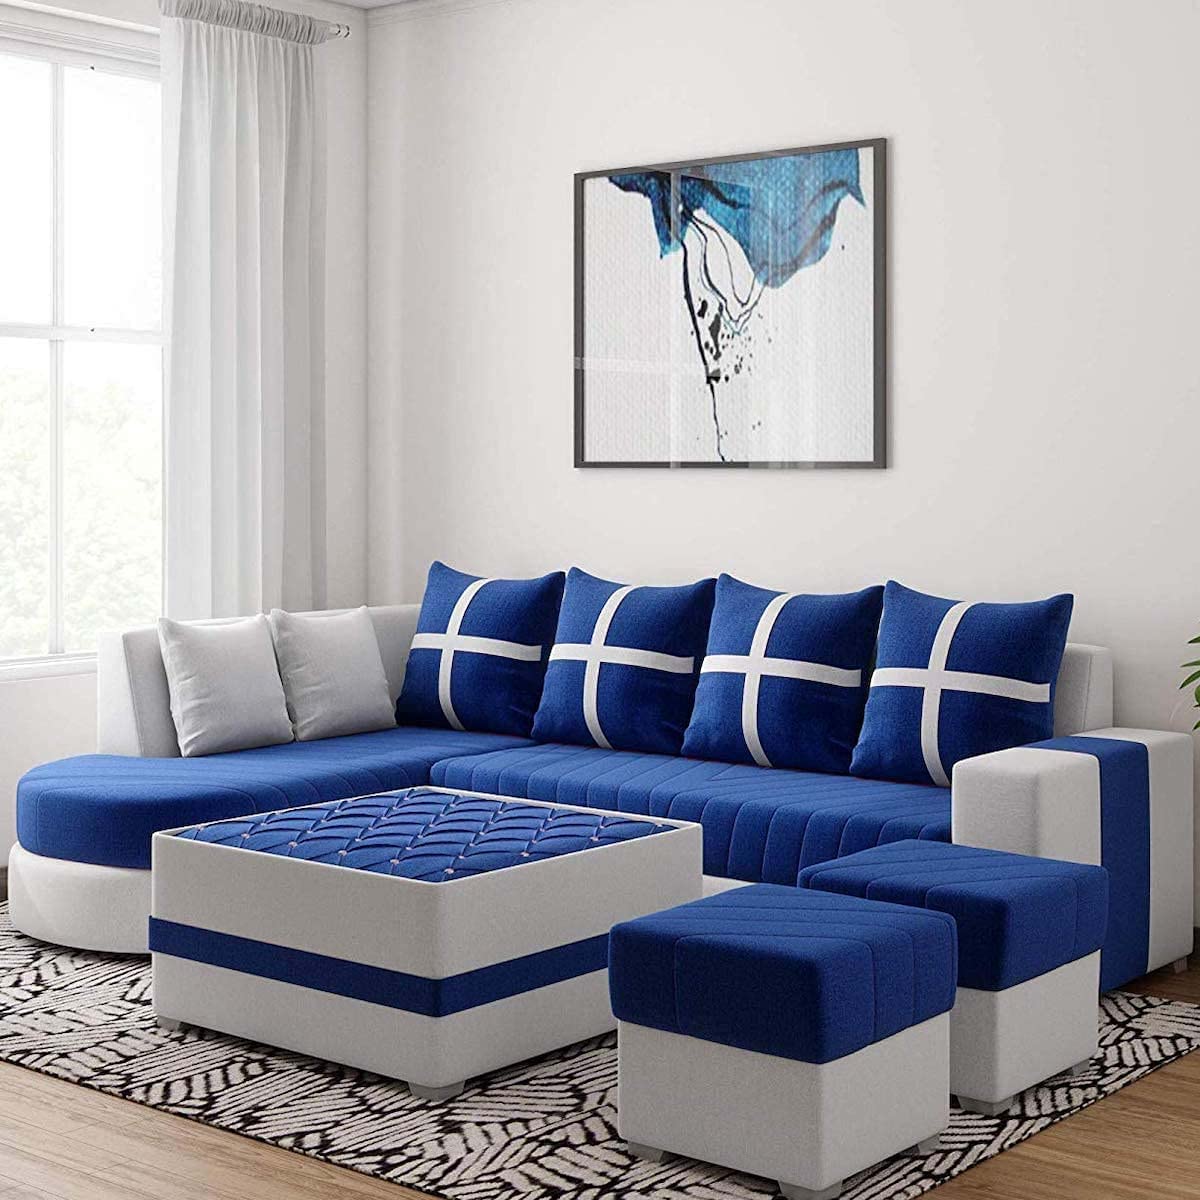 Torque India Dalton L Shape 8 Seater Sofa Set with Centre Table and 2 Puffy (LHS/ RHS) - Torque India